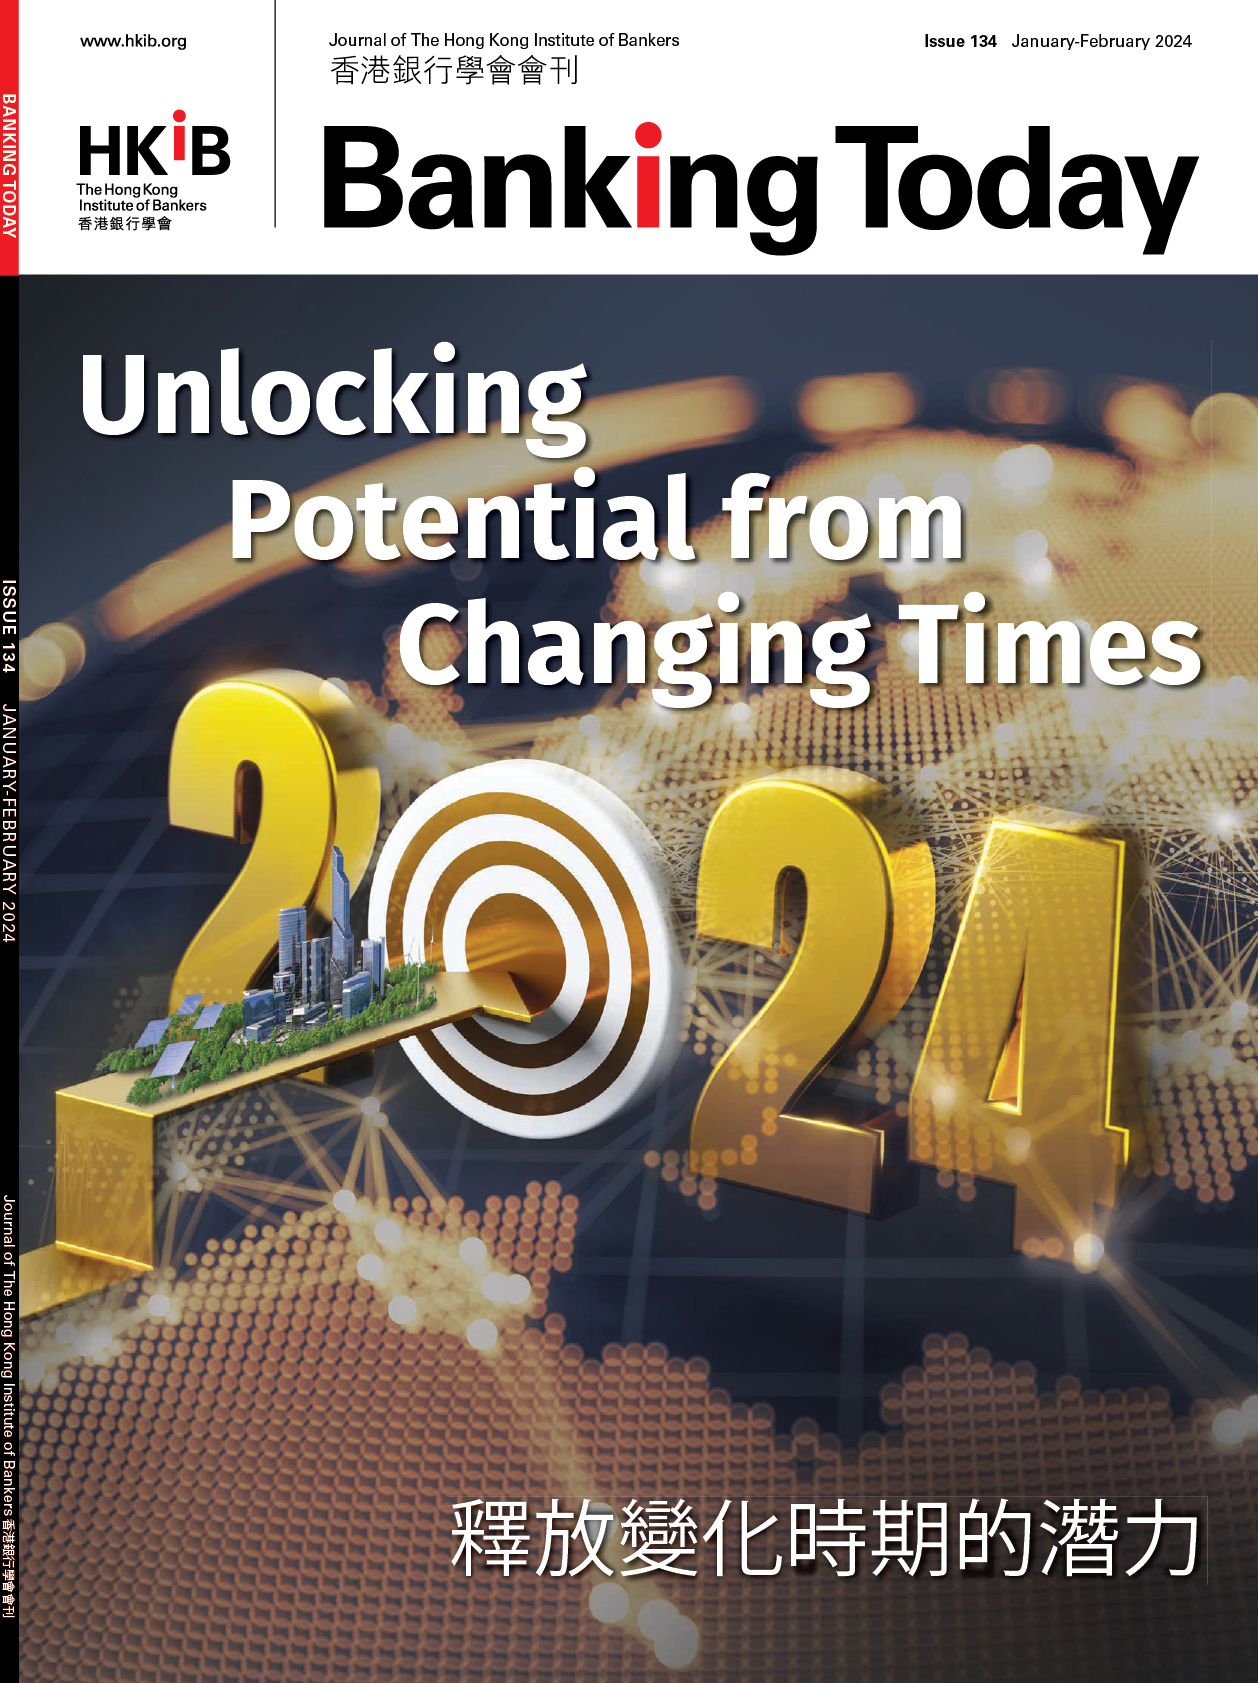 Unlocking Potential from Changing Times